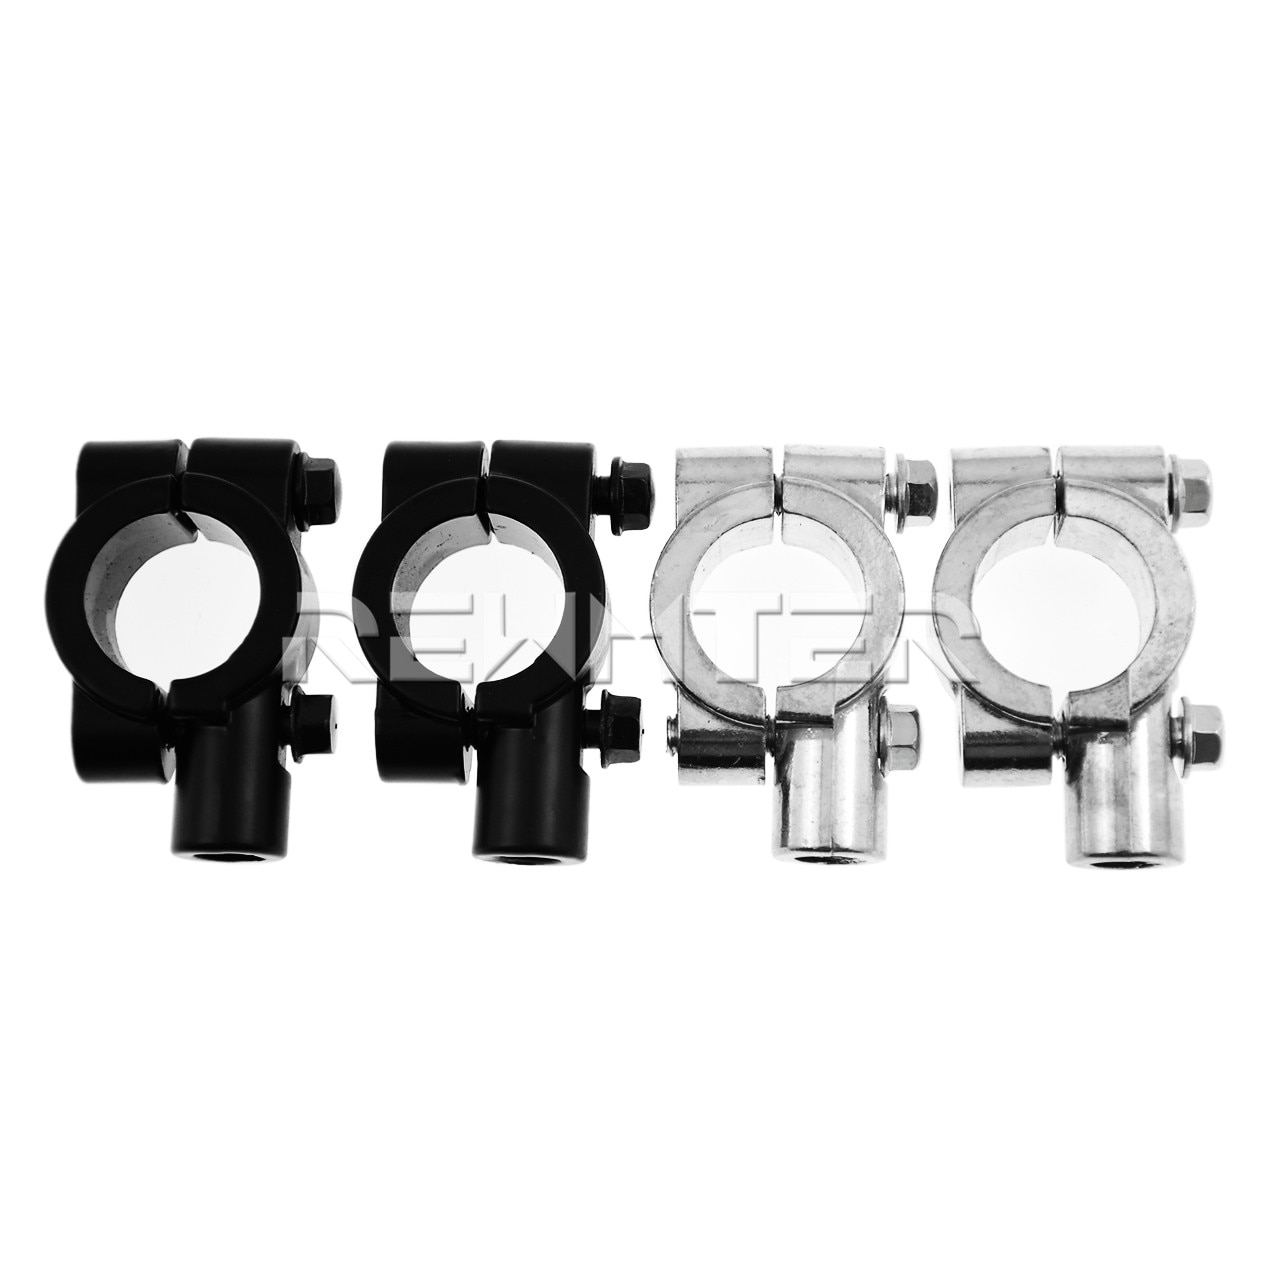 2PCS-Black-Silver-Motorcycle-accessories-Mirror-Mount-Clamp-Rear-View-Mirror-Holder-Size-22mm-10mm-8mm-1